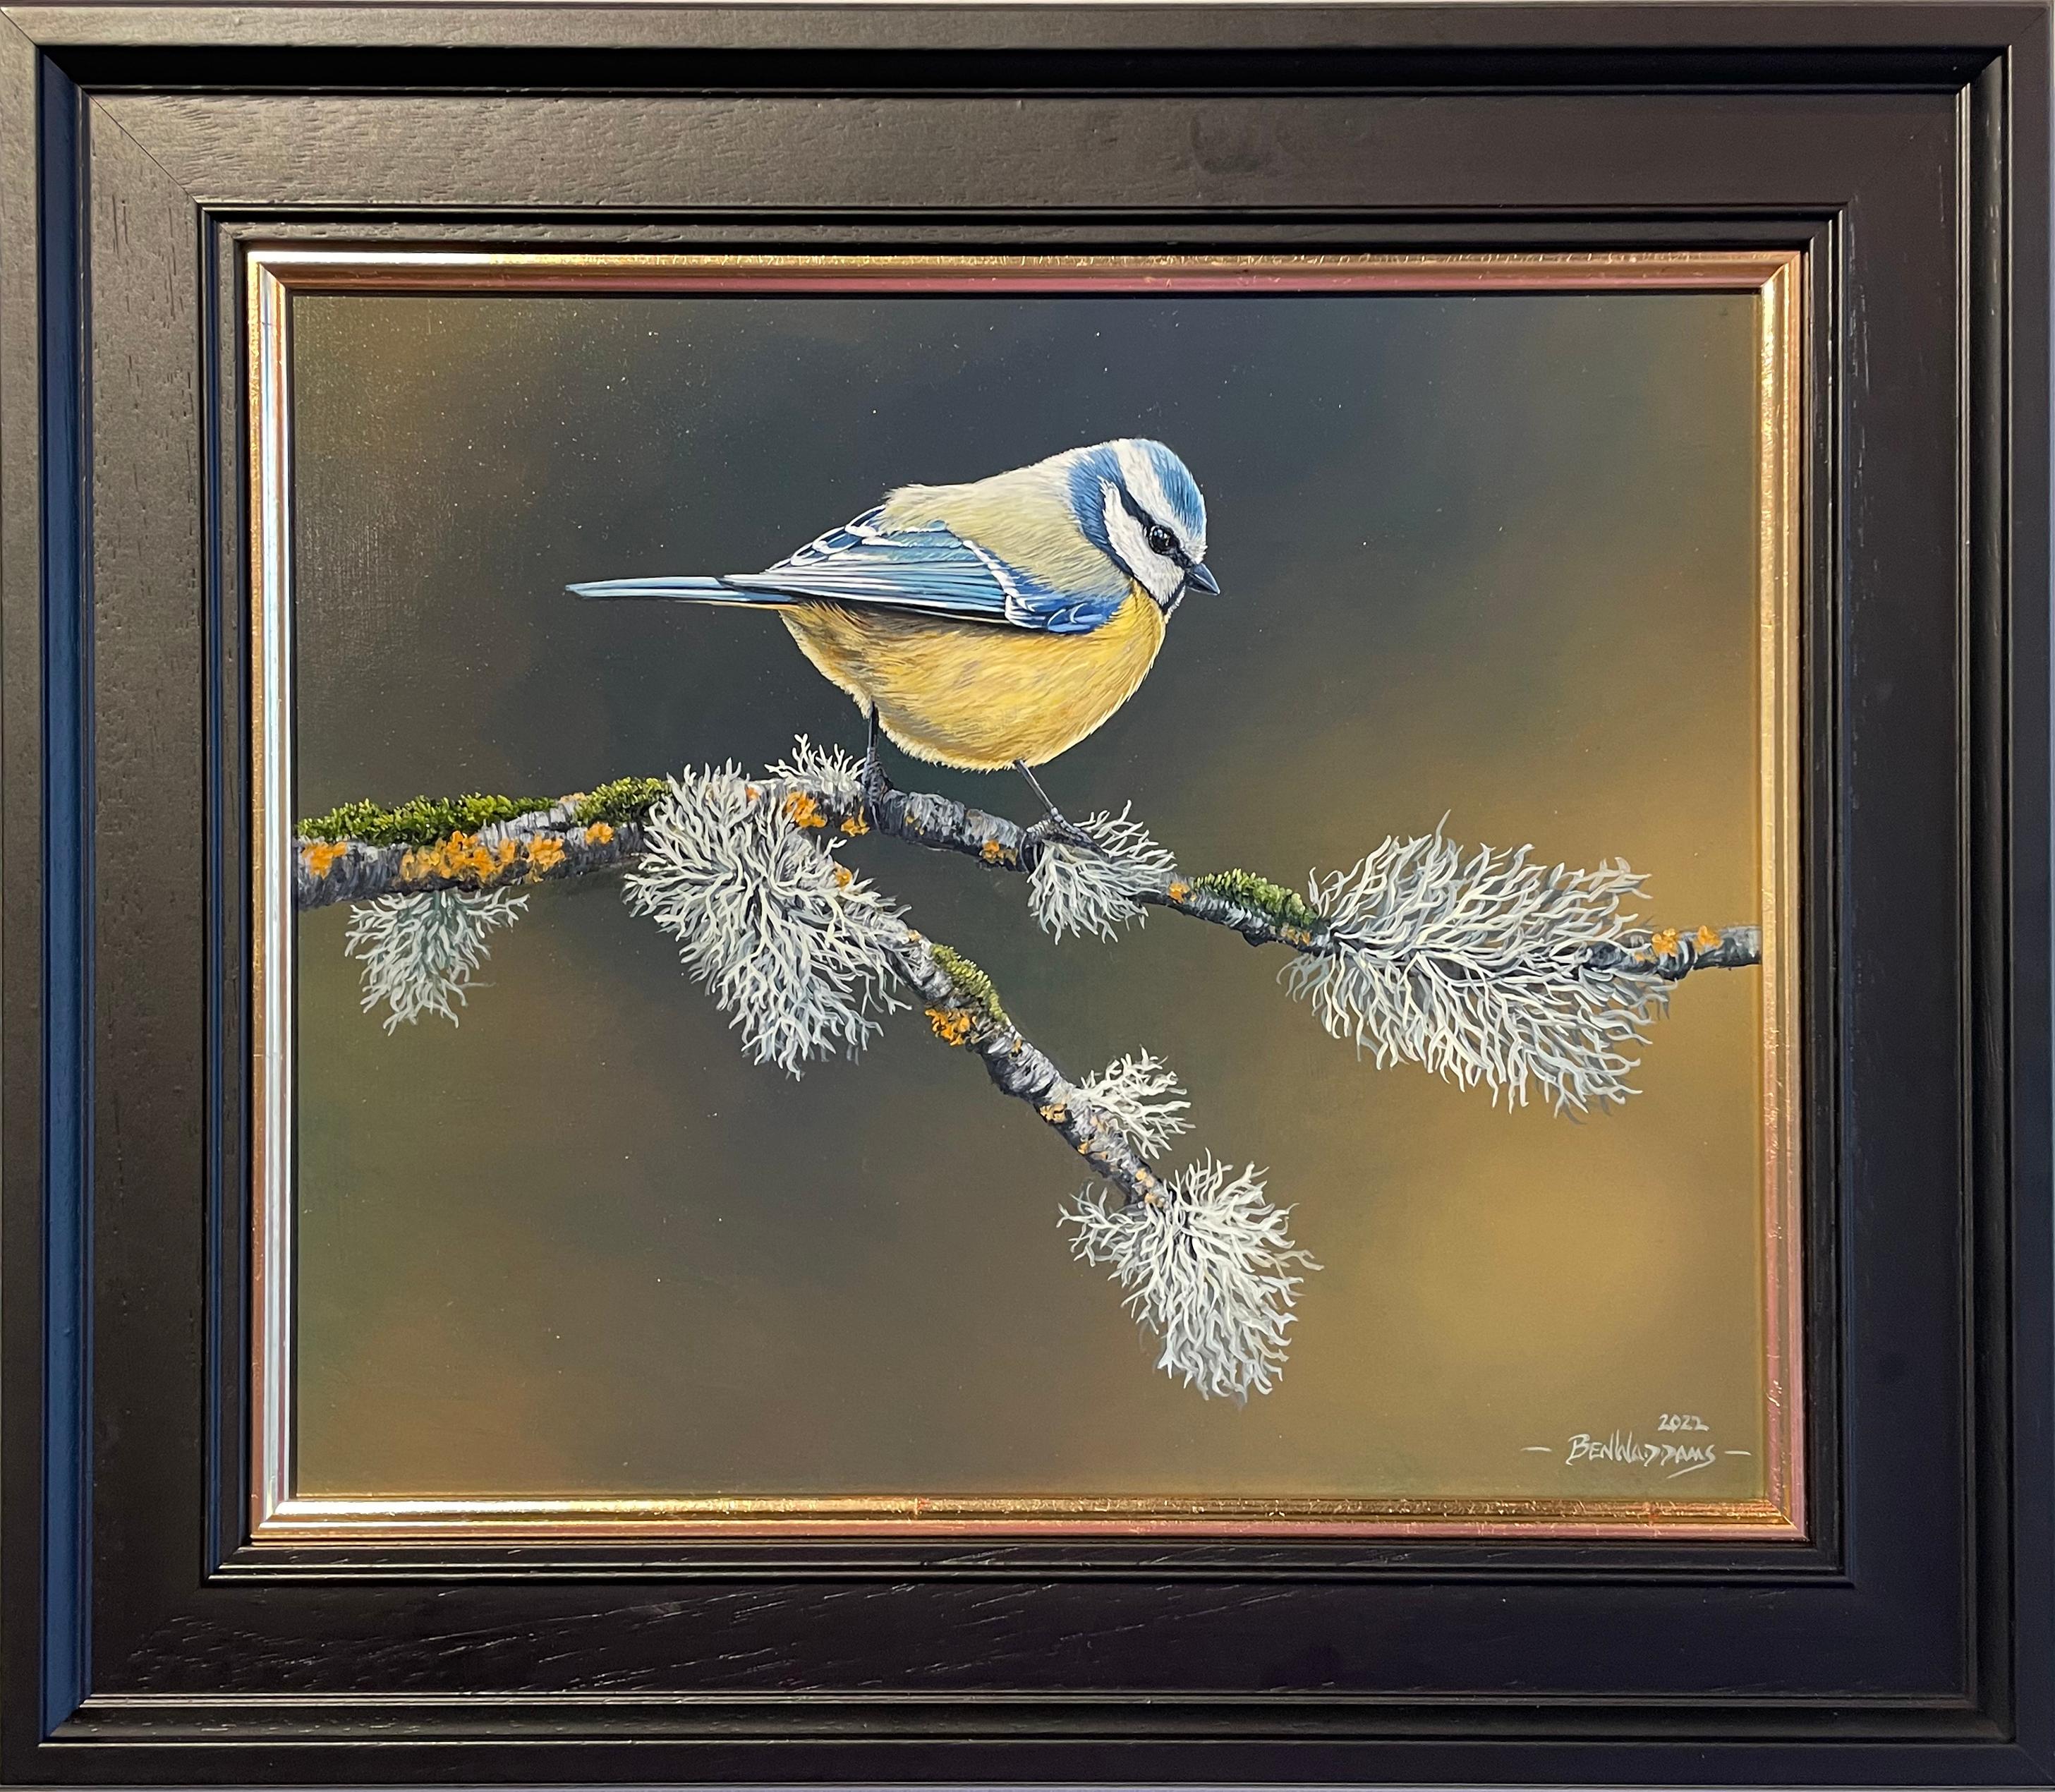 Ben Waddams Animal Painting – Balancing Act" Contemporary Photorealist painting of Blue Tit bird in the wild